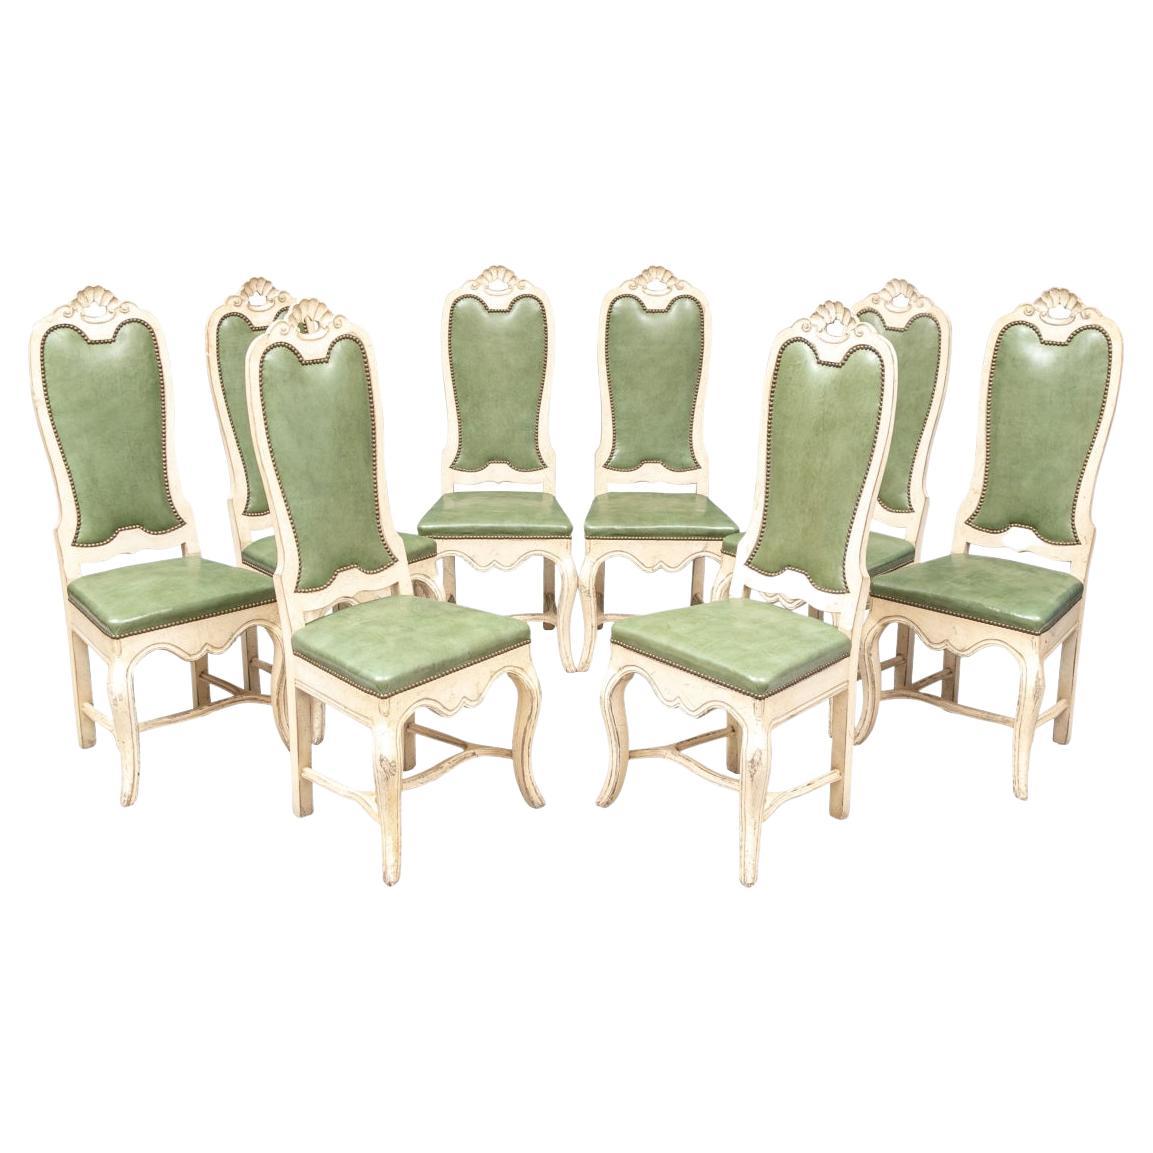 Set of 8 Cream Paint Decorated Fruitwood Dining Chairs with Green Faux Leather For Sale